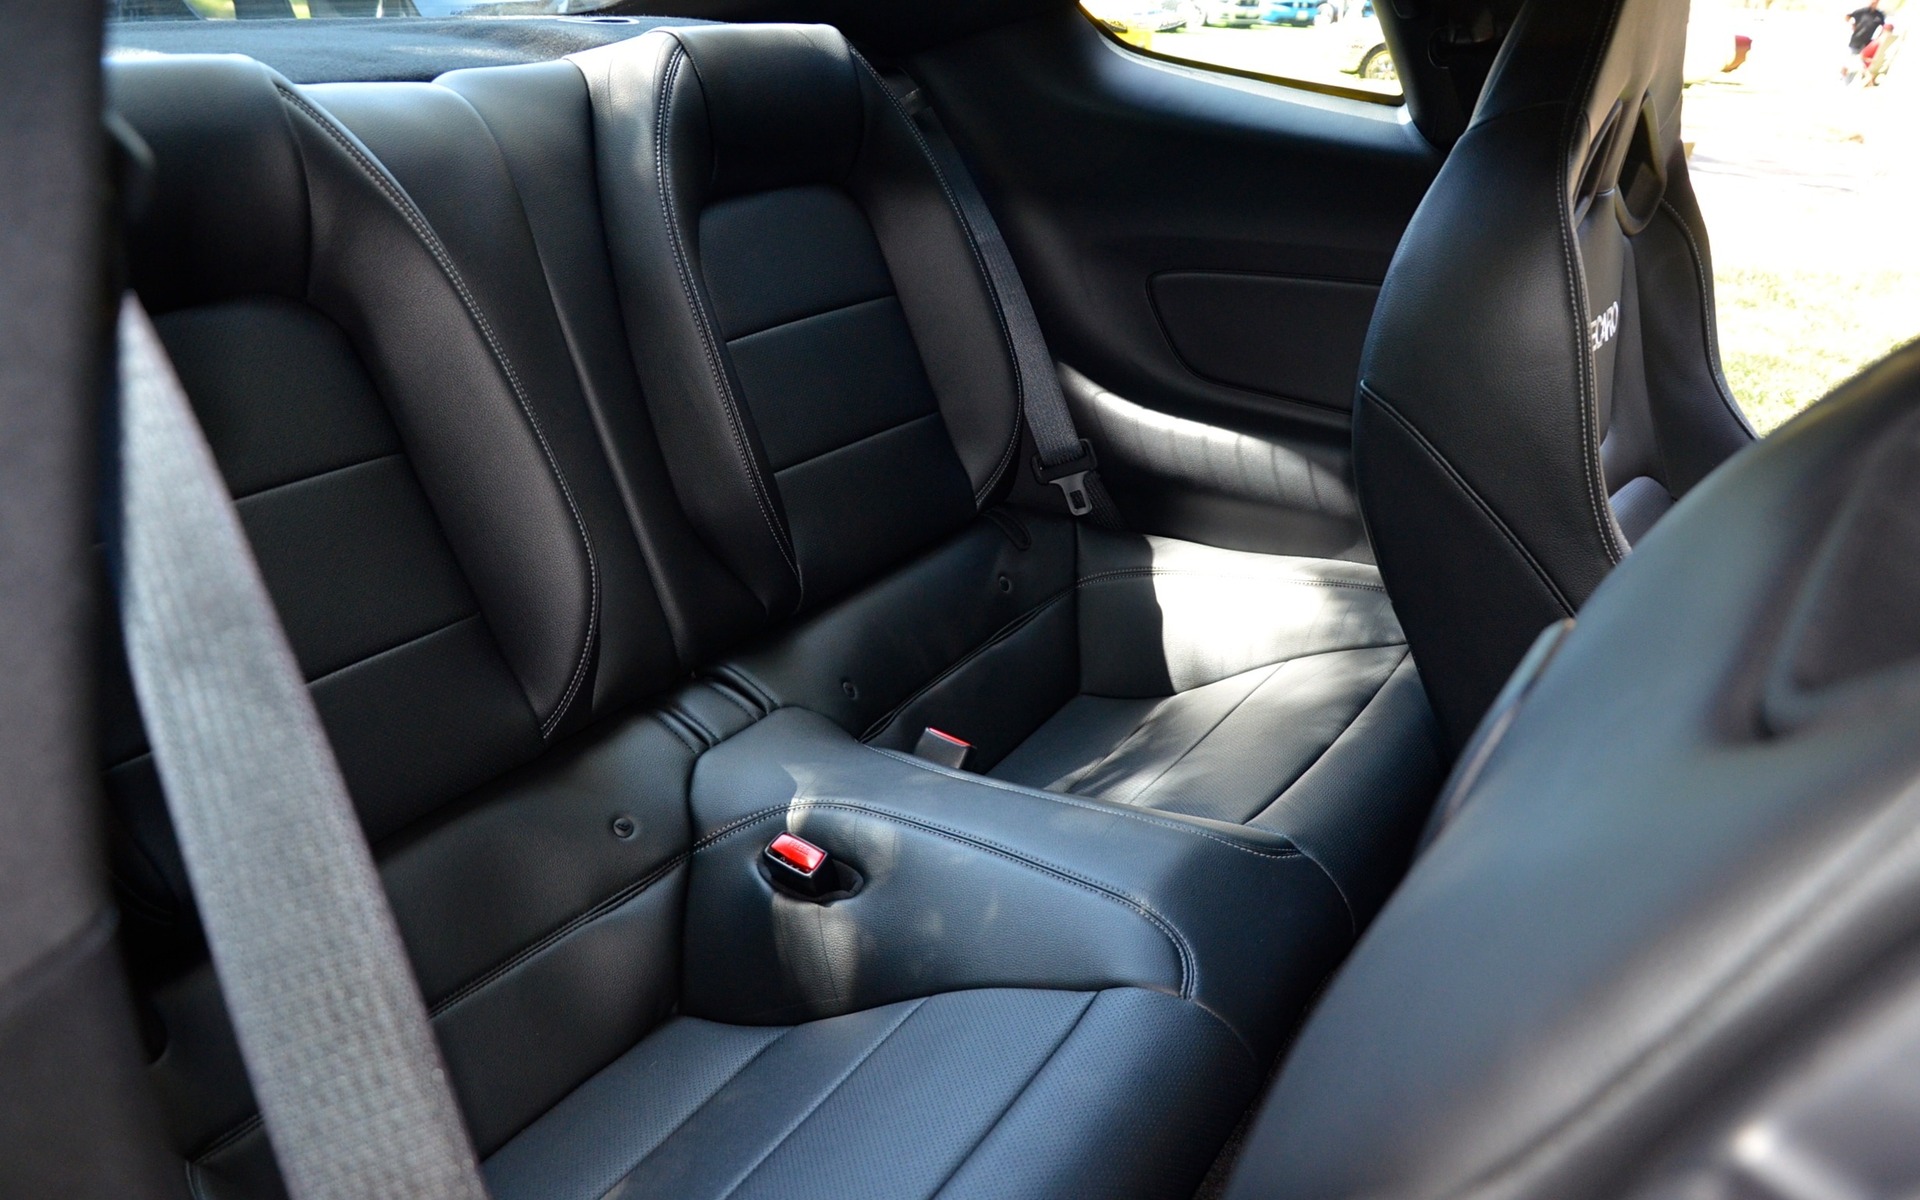 2015 Ford Mustang GT Coupe - Rear seat leg room is seriously limited